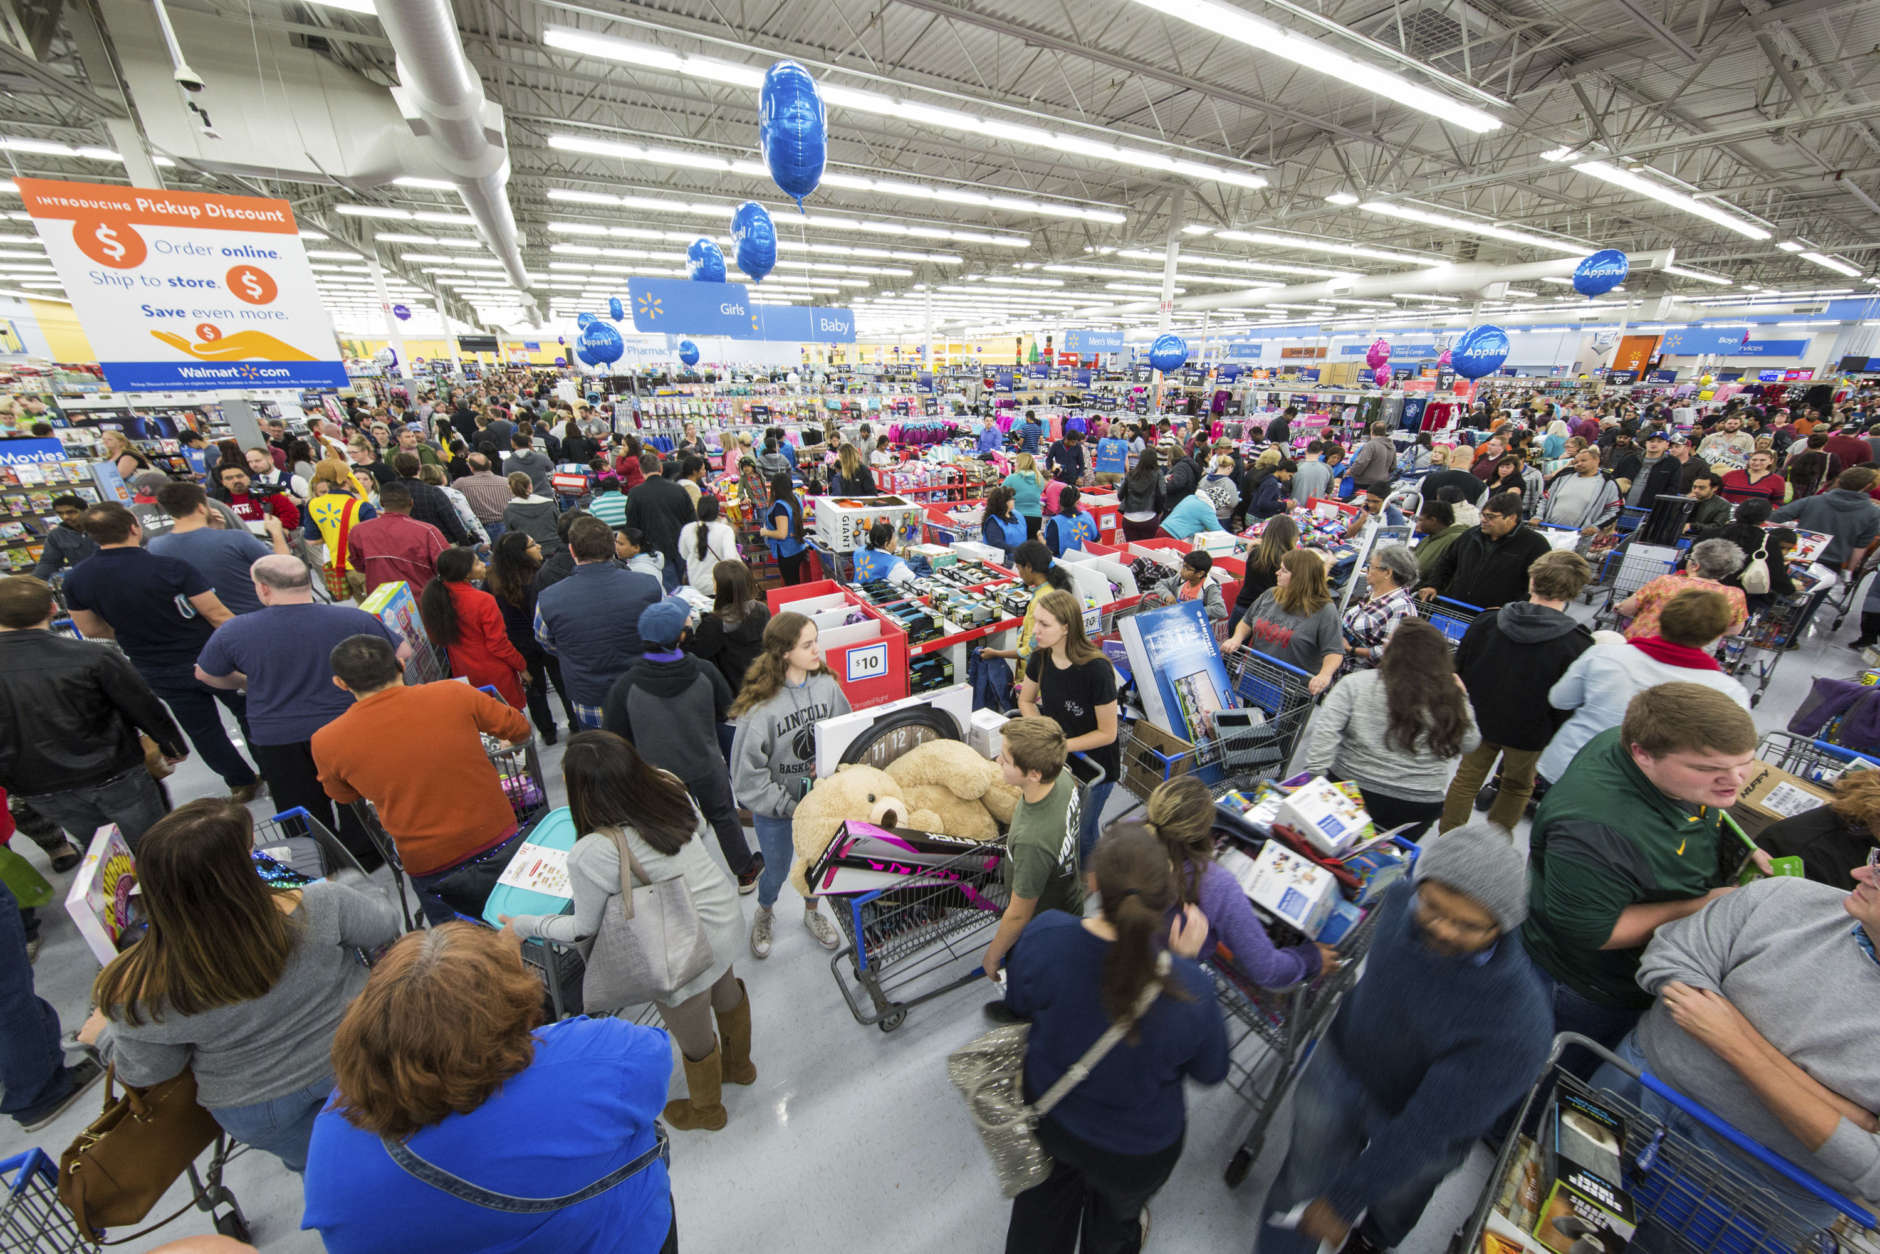 IMAGE DISTRIBUTED FOR WALMART - Holiday shoppers scored great deals at Walmart on Thursday, Nov. 23, 2017 in Bentonville, Ark. Color coded departments in Walmart stores helped customers locate top products across categories including electronics, toys, home, and apparel. (Gunnar Rathbun/AP Images for Walmart)